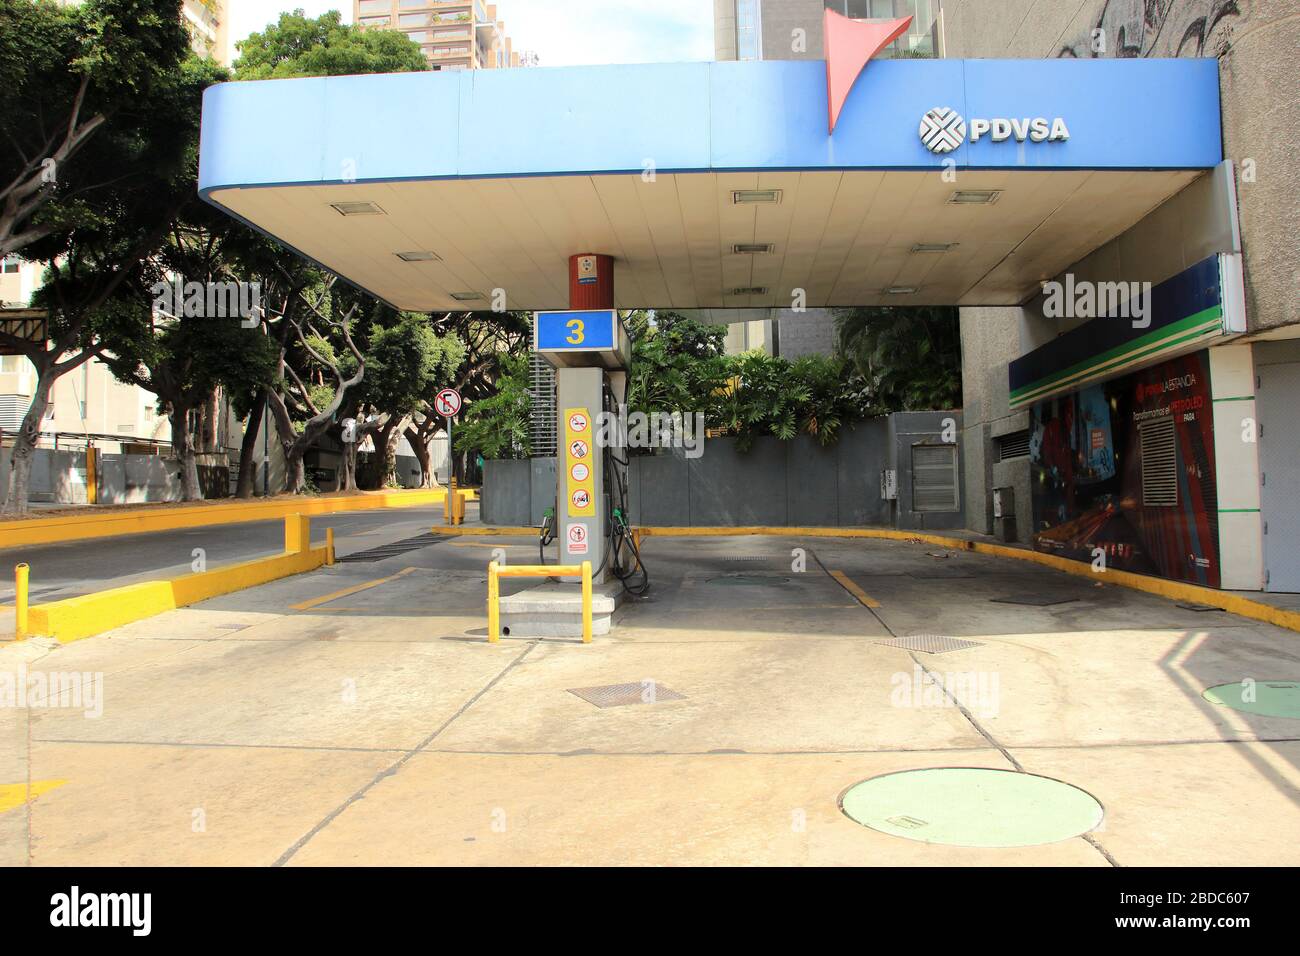 Caracas, Venezuela March 31, 2020: empty gas station PDVSA state owned enterprise oil and gas company is seen during Venezuela fuel shortages covid-19 Stock Photo